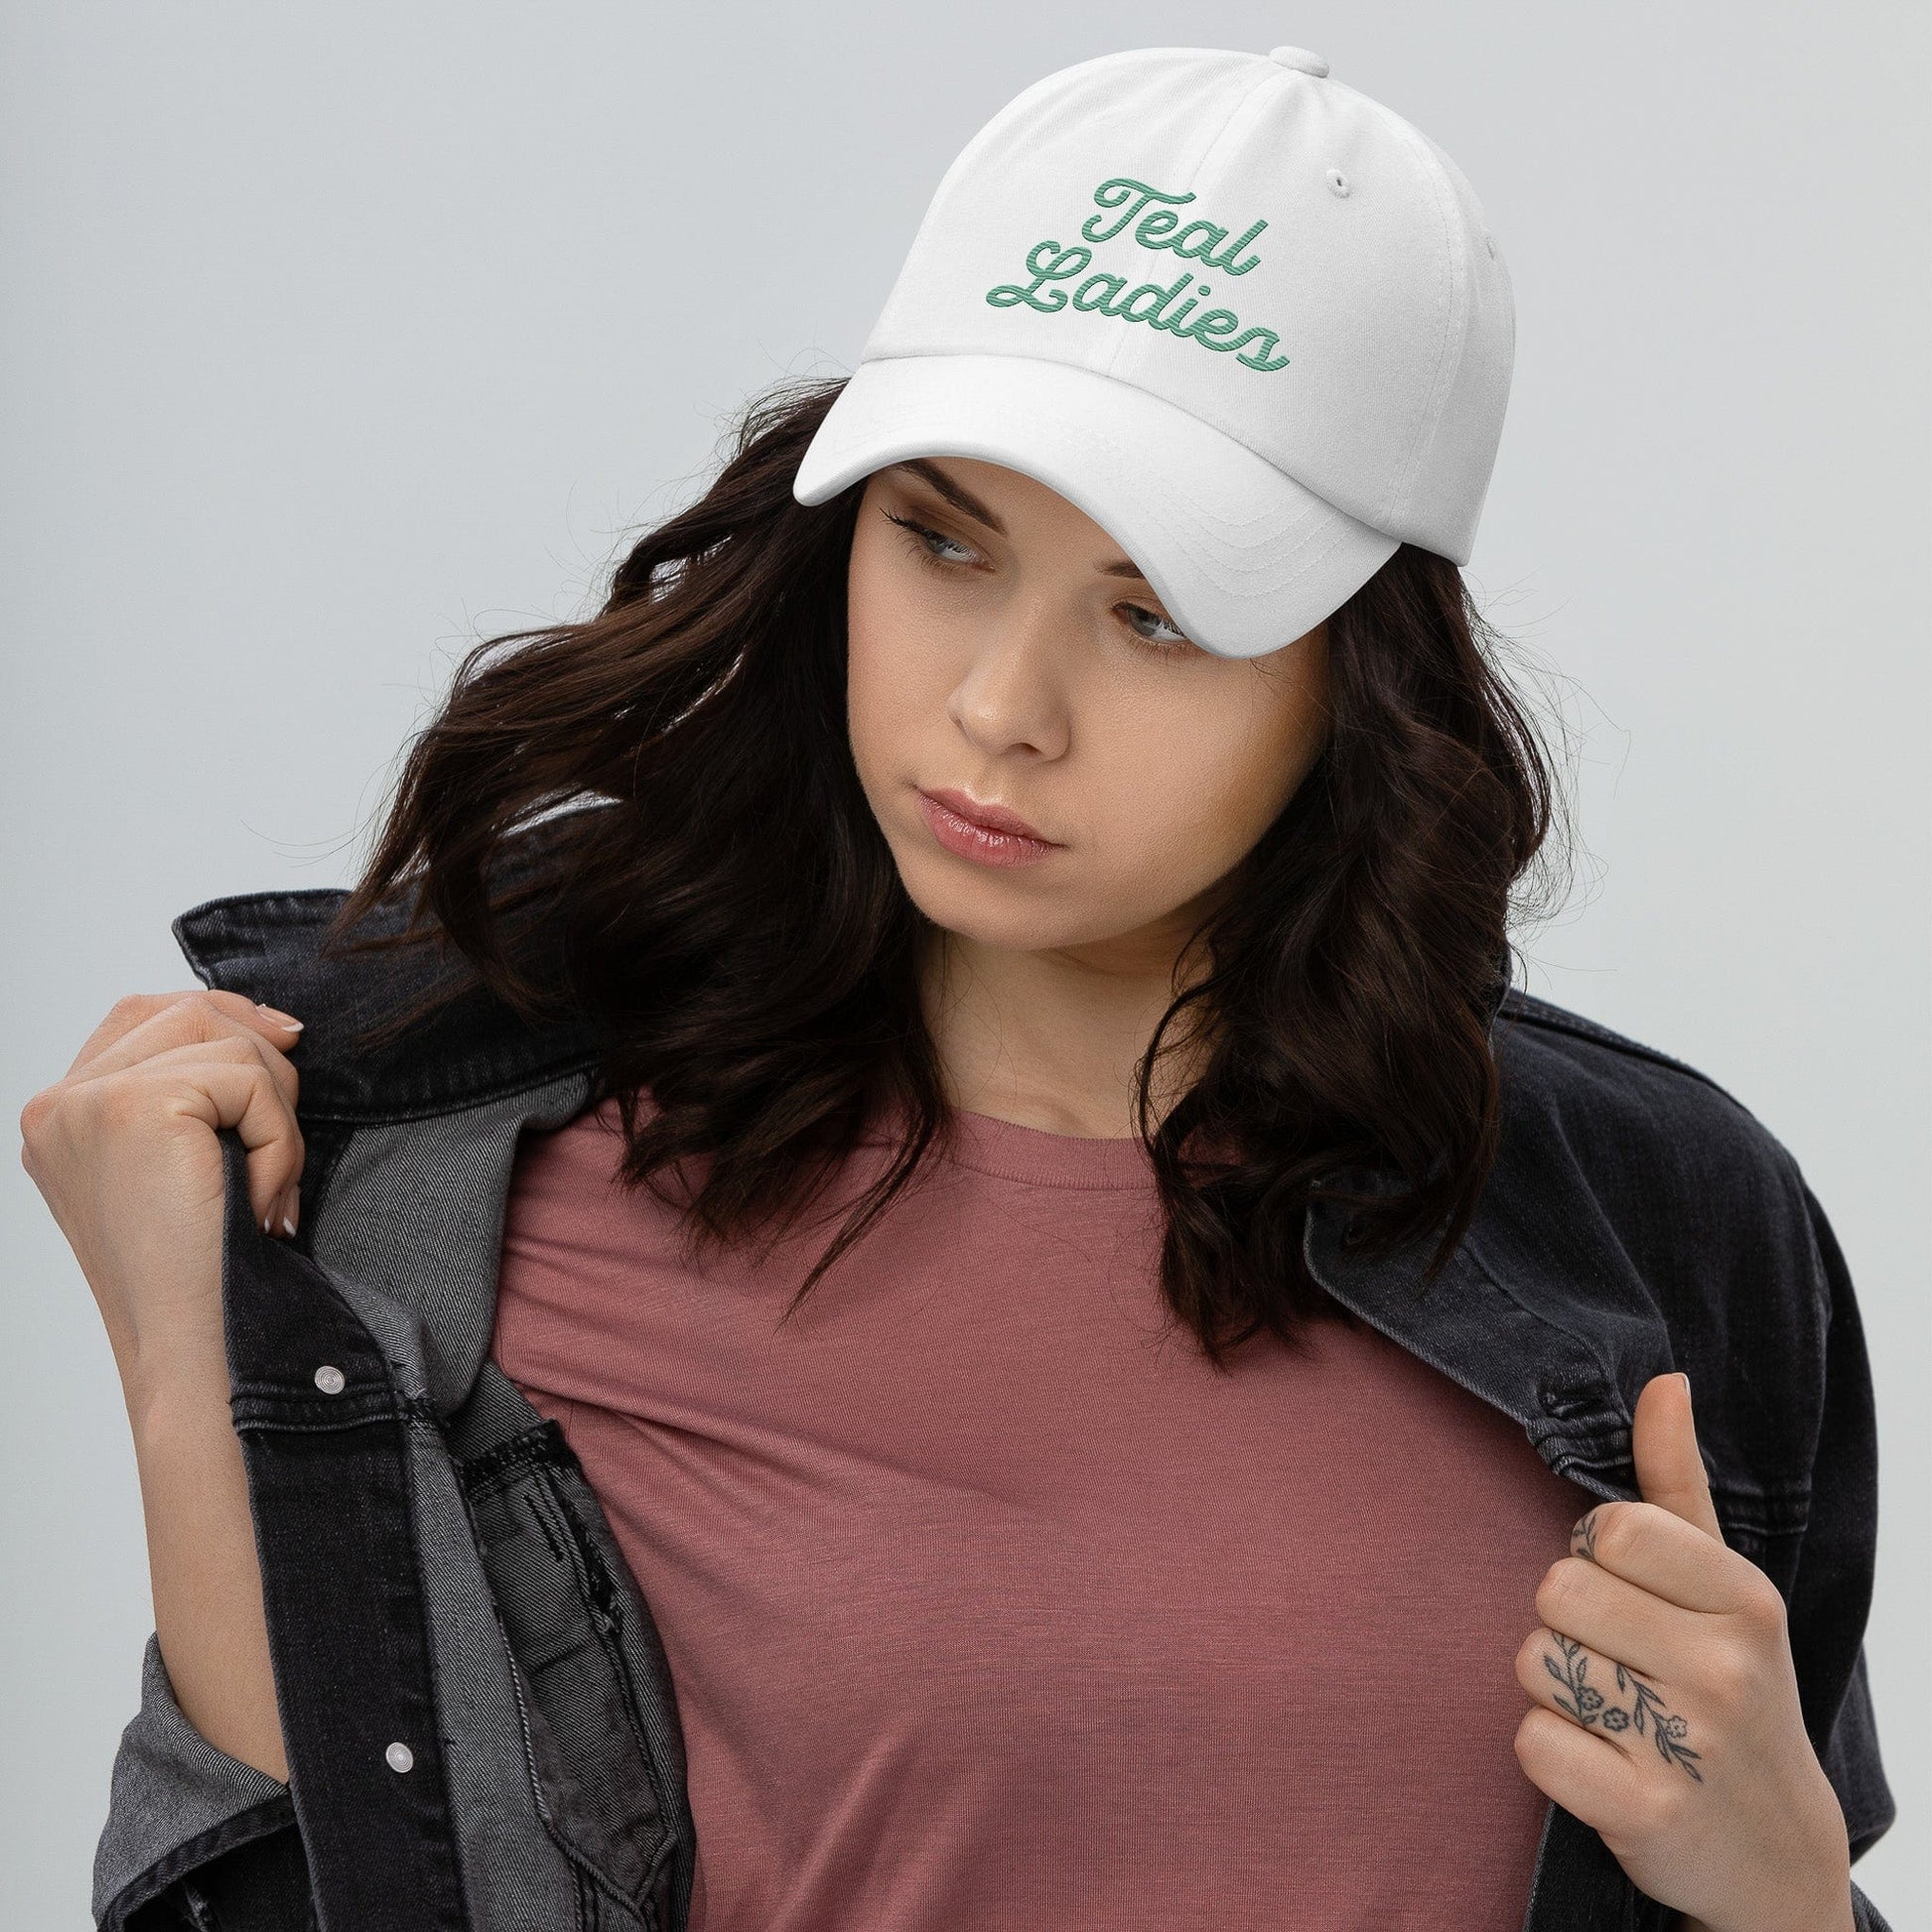 KC Swag Kansas City Current White Teal Ladies Classic Dad Hat worn by female model